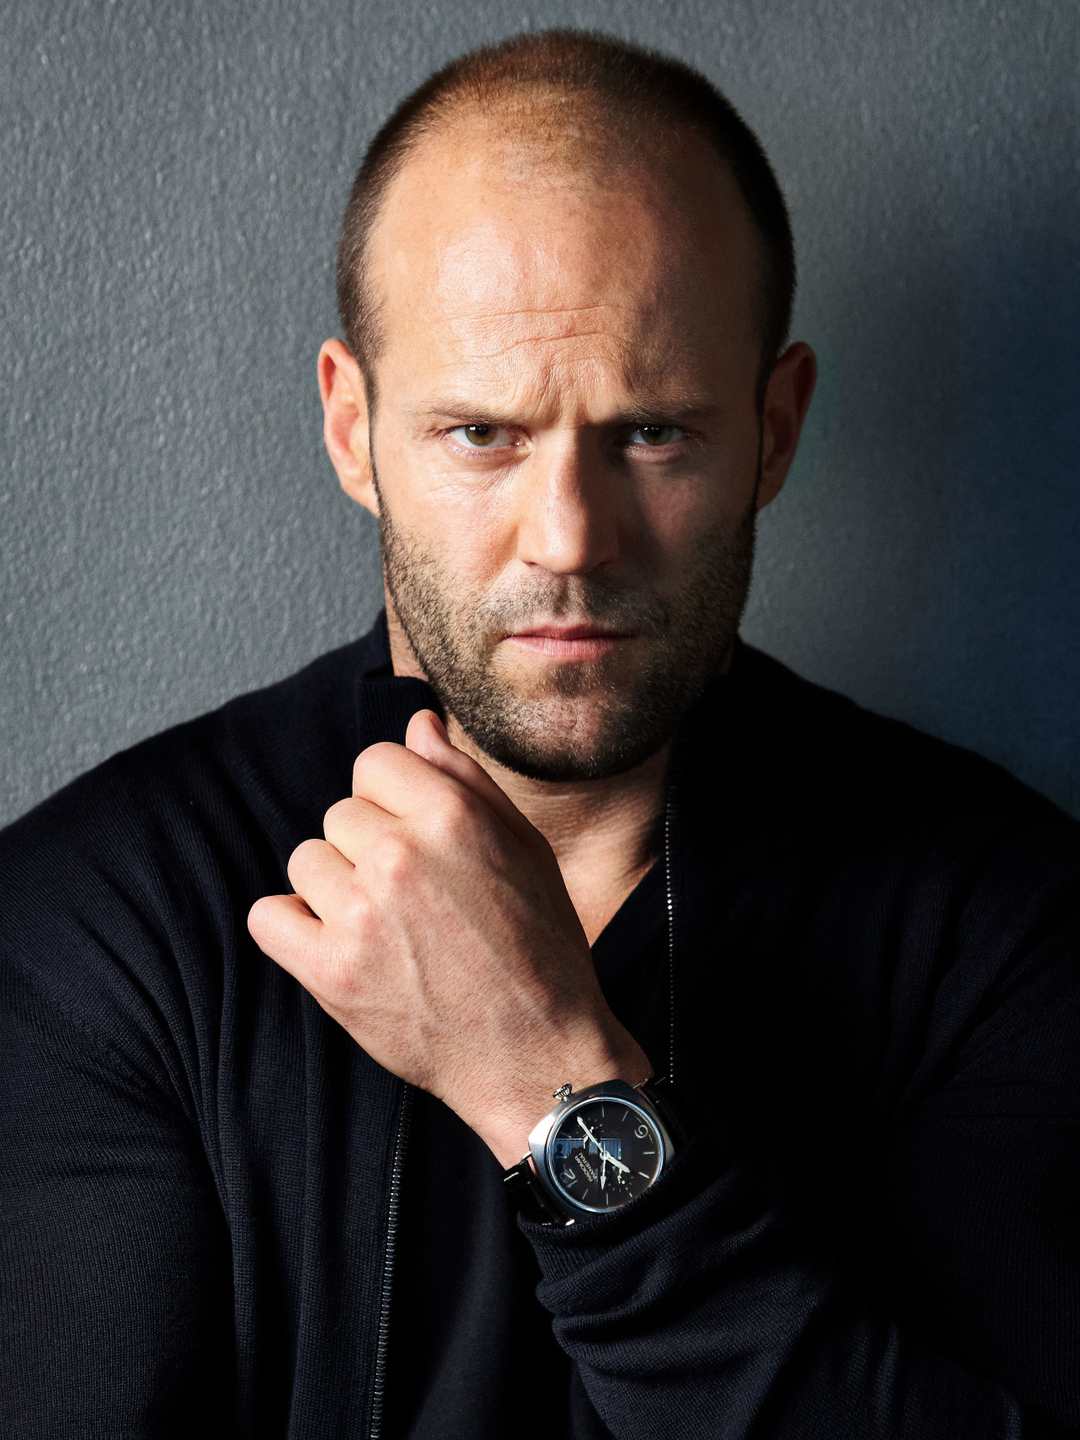 Jason Statham how old is he